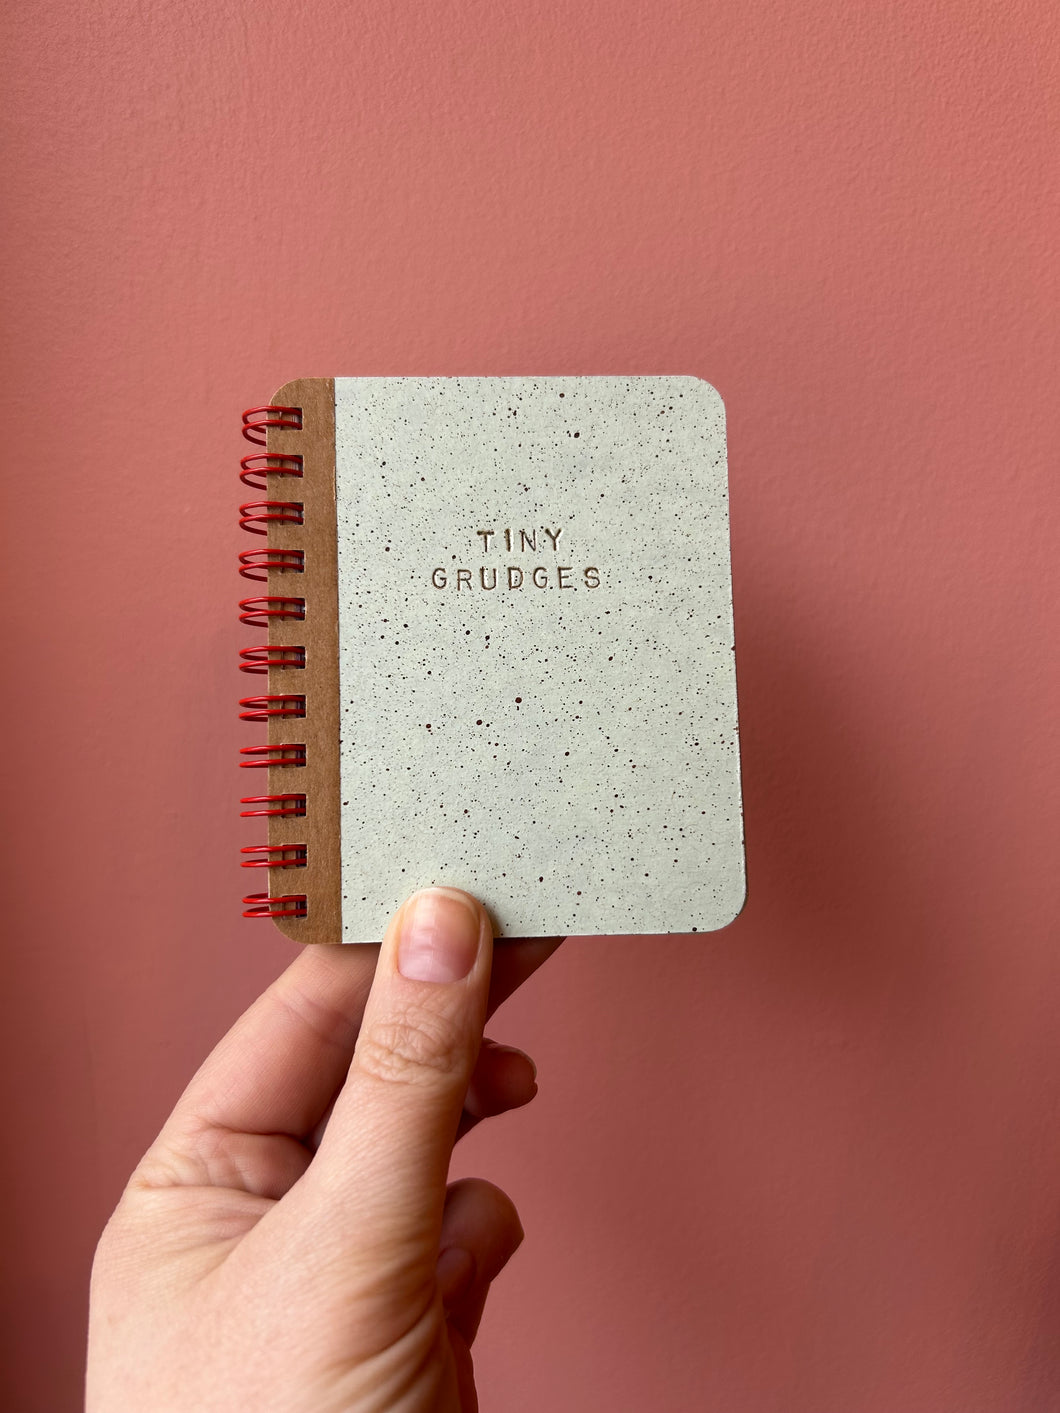 TINY GRUDGES - handmade rescued notebook